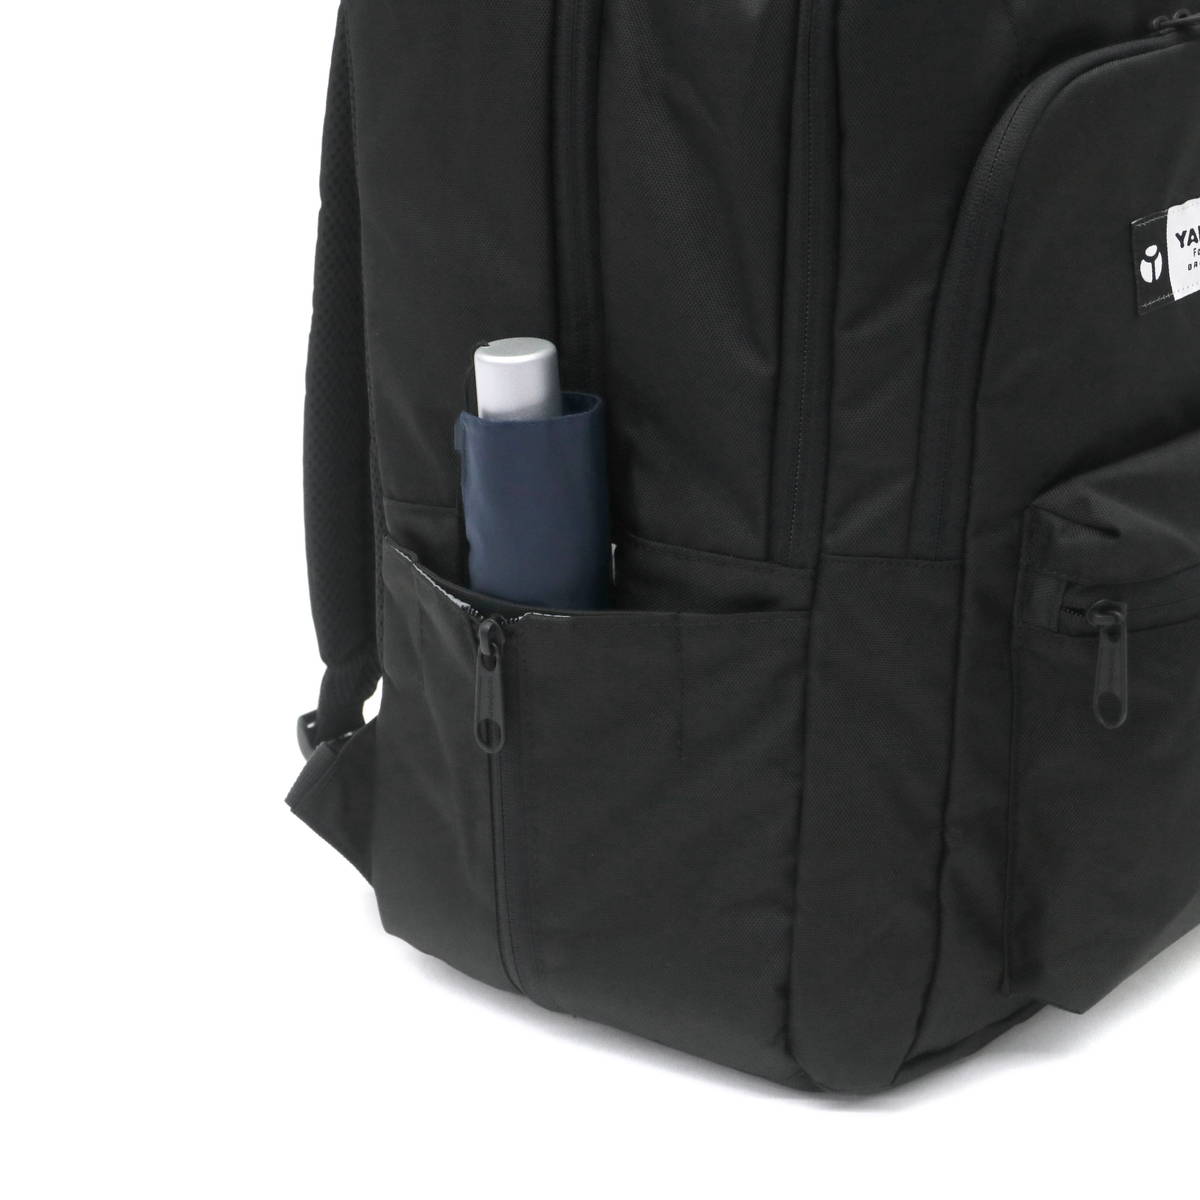 YAKPAK ヤックパック FORCE BACKPACK バックパック 25L 8125321 